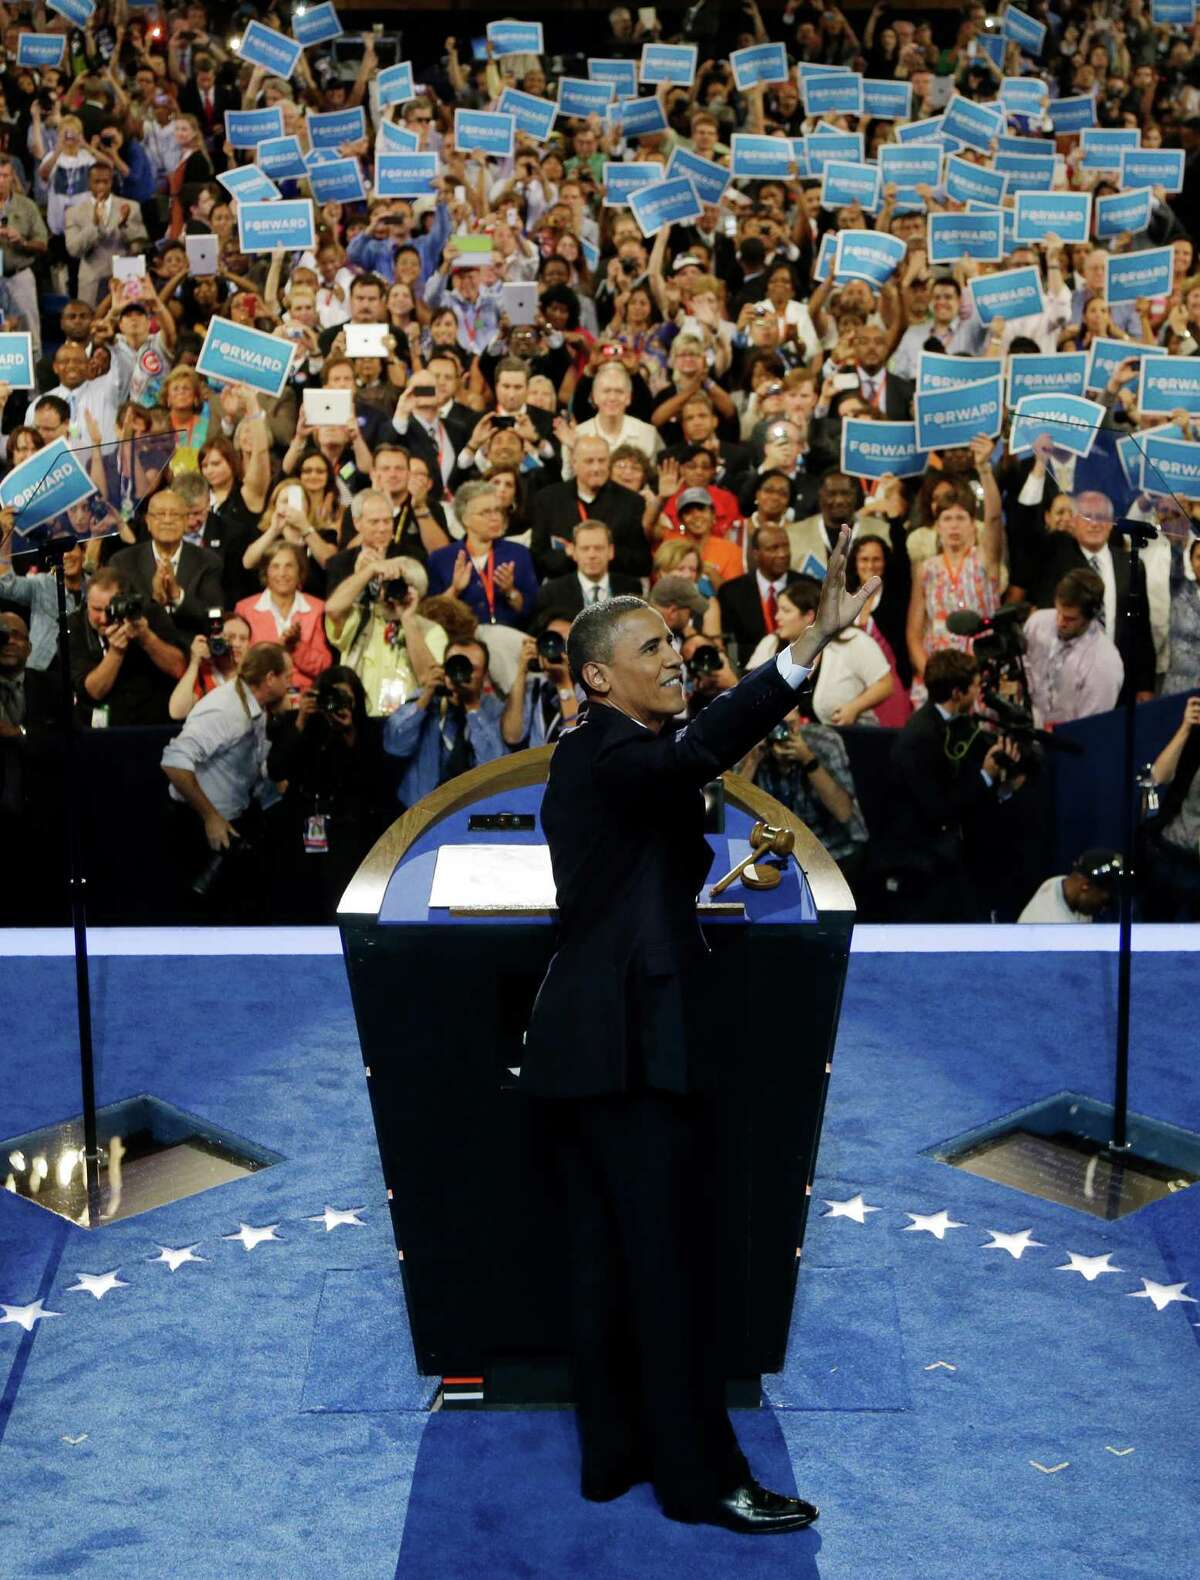 President Barack Obama waves to delegates at the Democratic National Convention in Charlotte, N.C., on Thursday, Sept. 6, 2012. (AP Photo/Charlie Neibergall)